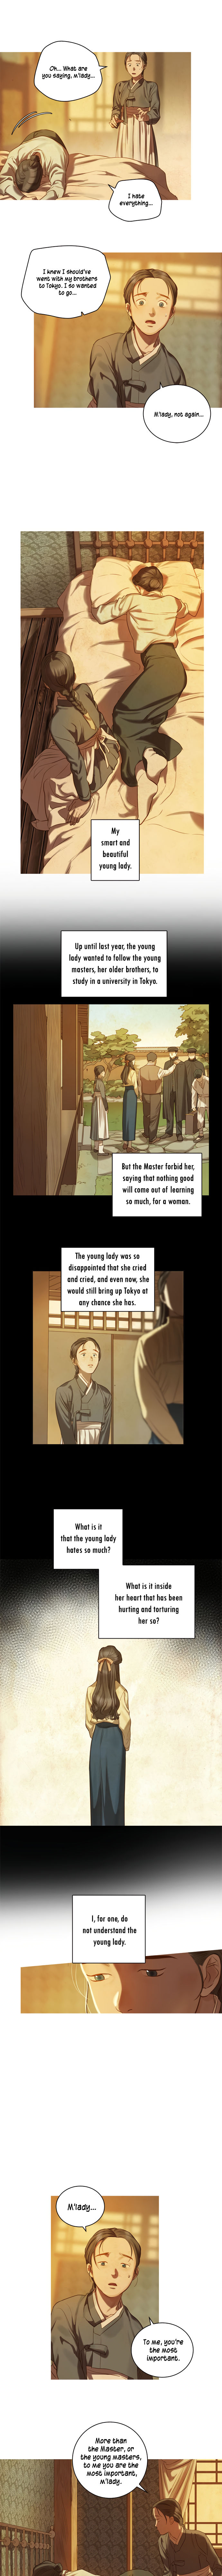 Gorae Byul - The Gyeongseong Mermaid - Chapter 2 Page 8